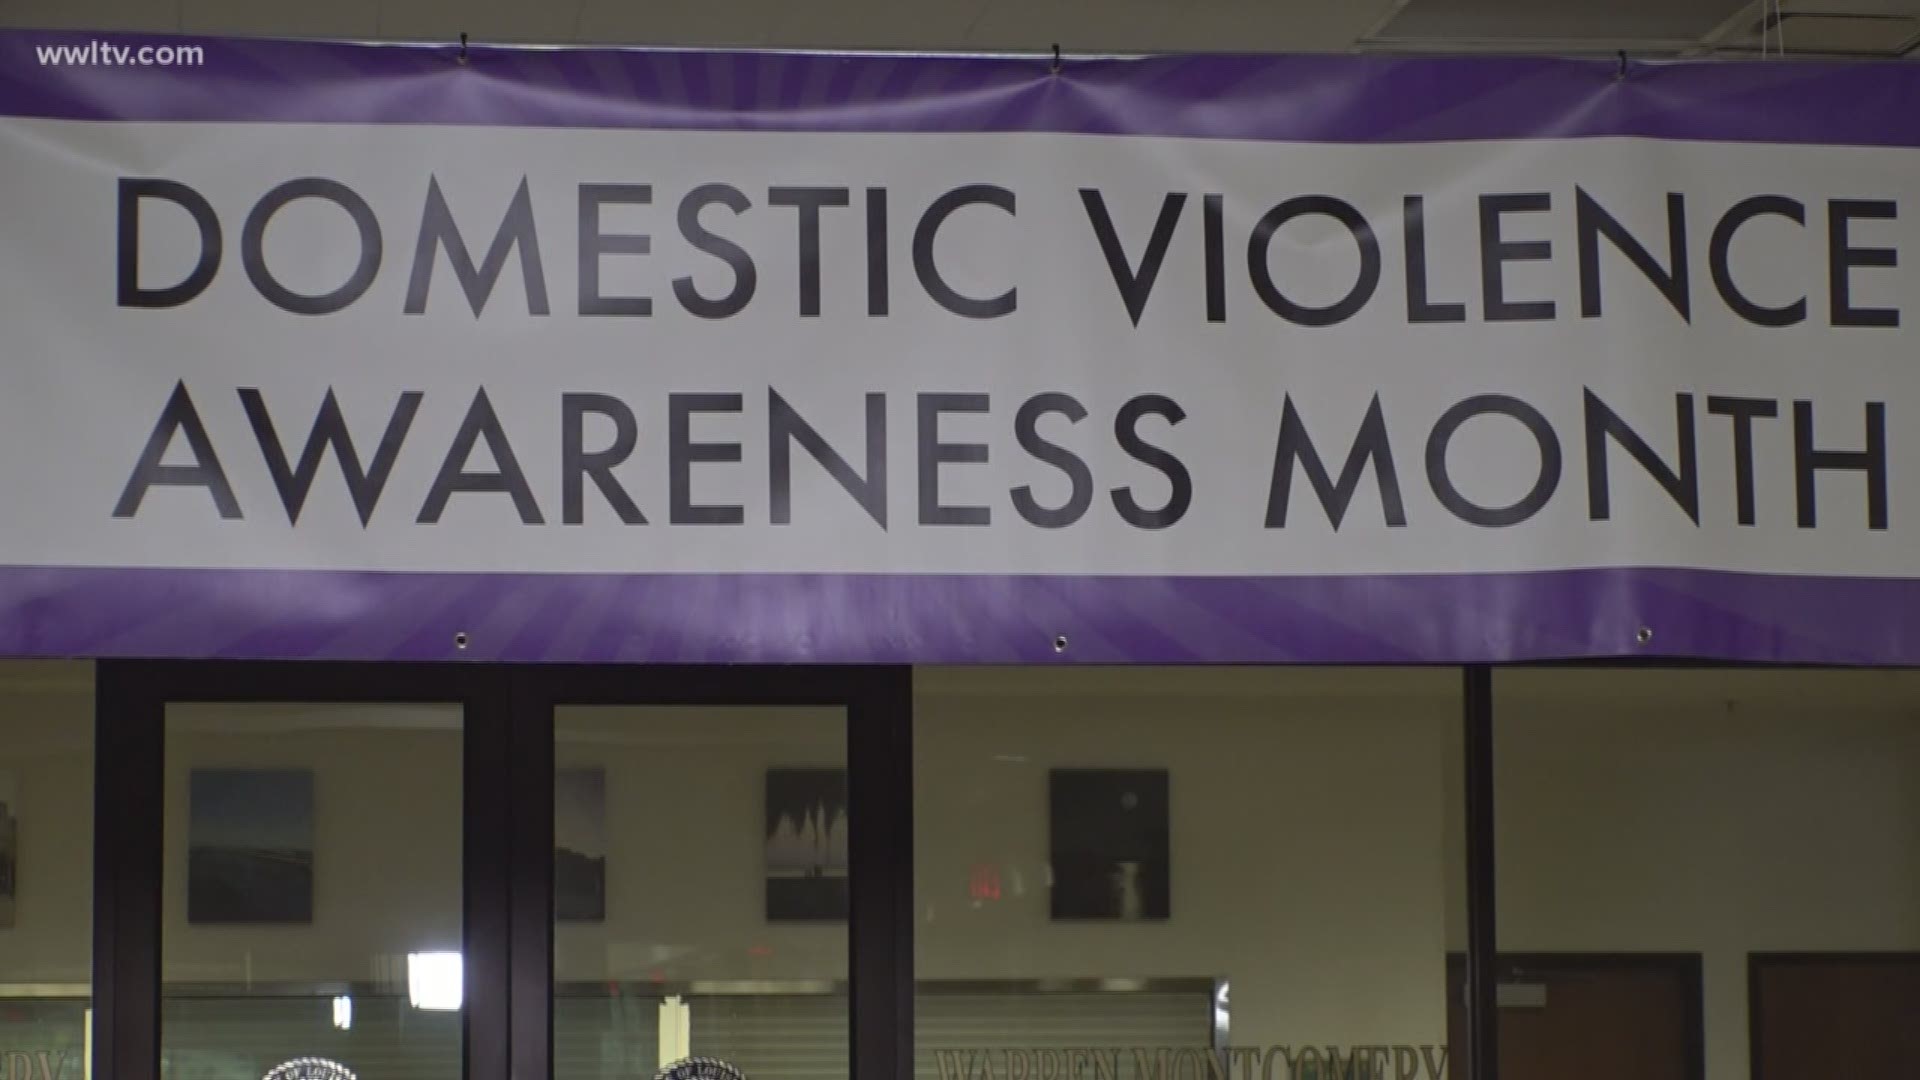 Message to survivors is 'you matter'